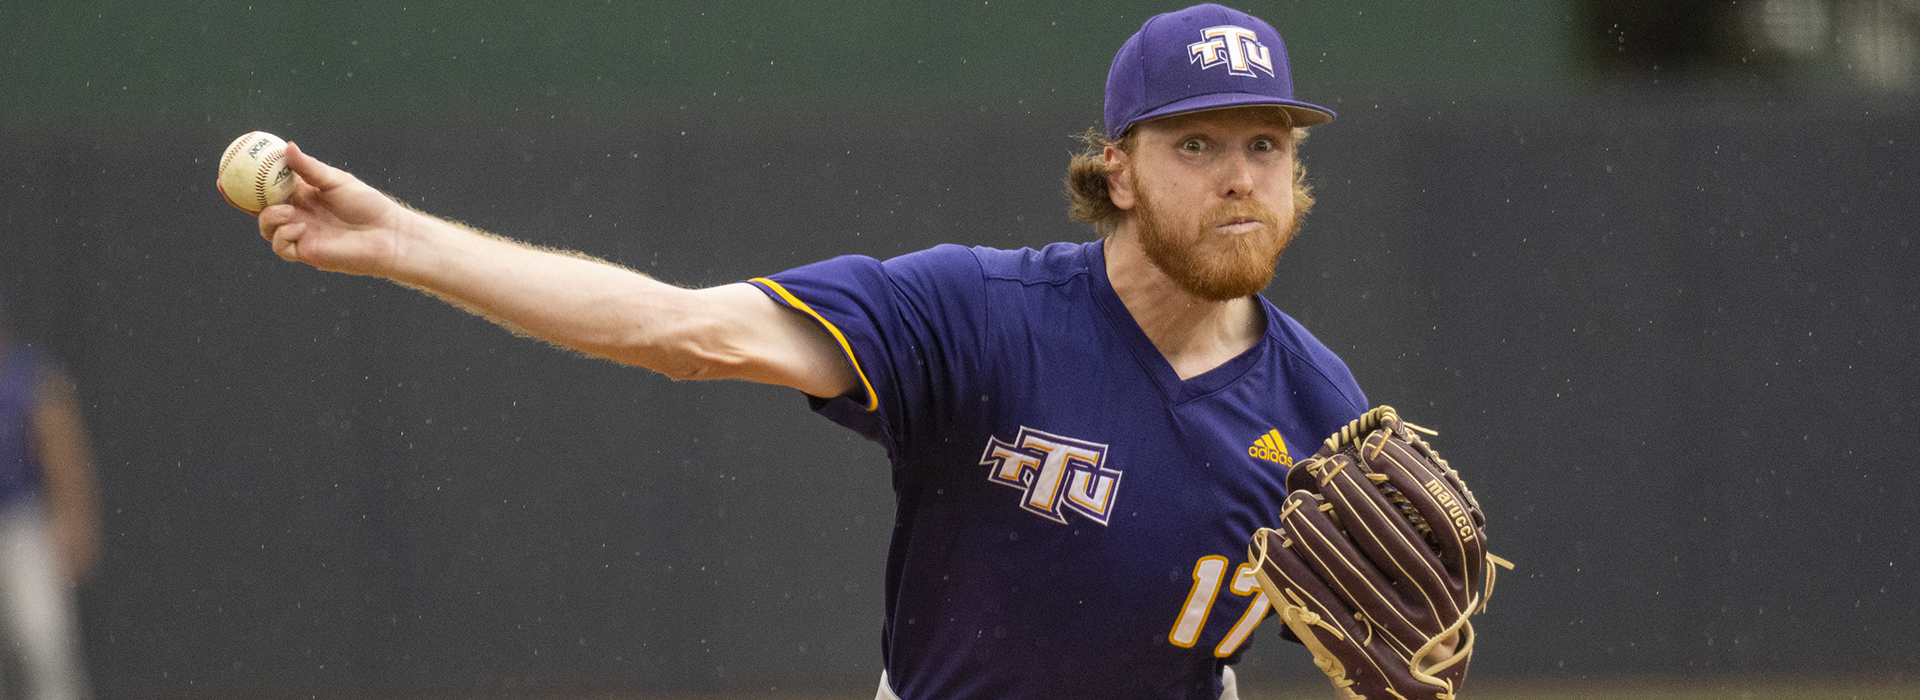 Tech to host in-state rival ETSU in weekend series starting Friday night